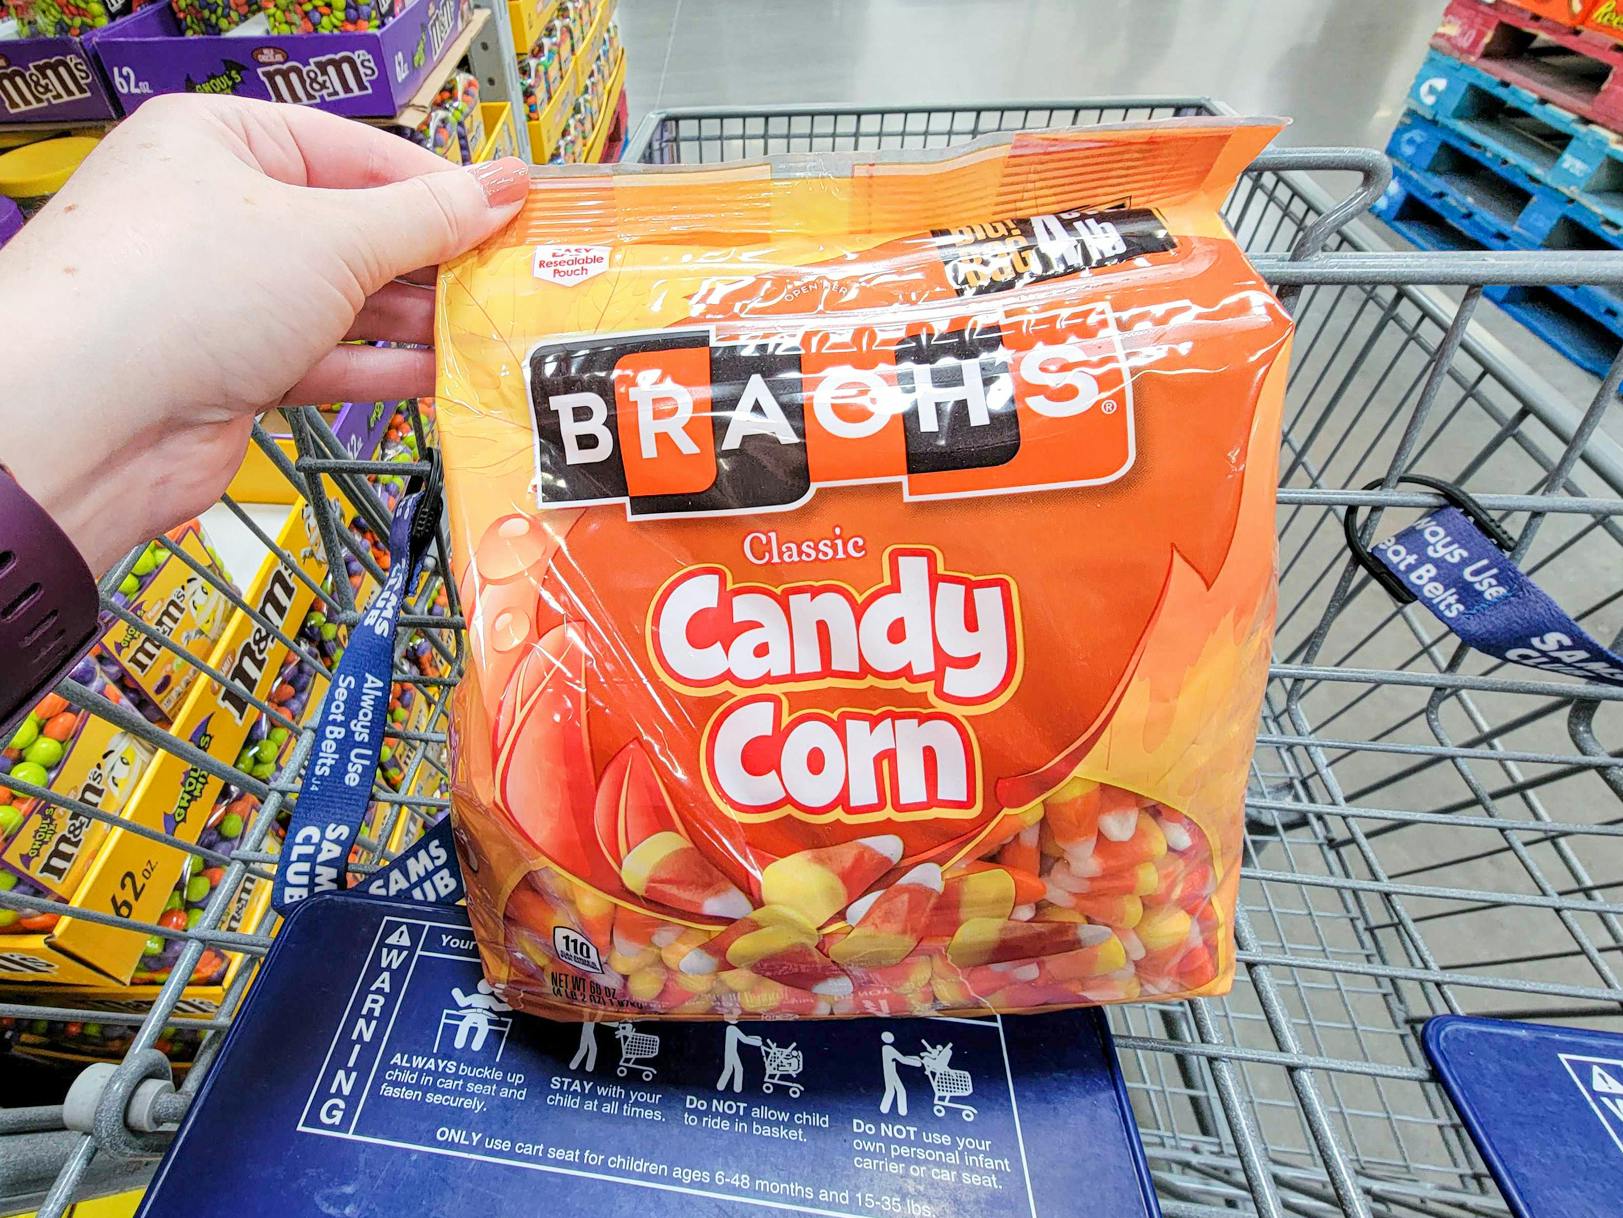 A person's hand putting a large bag of candy corn in a cart at Sam's Club.